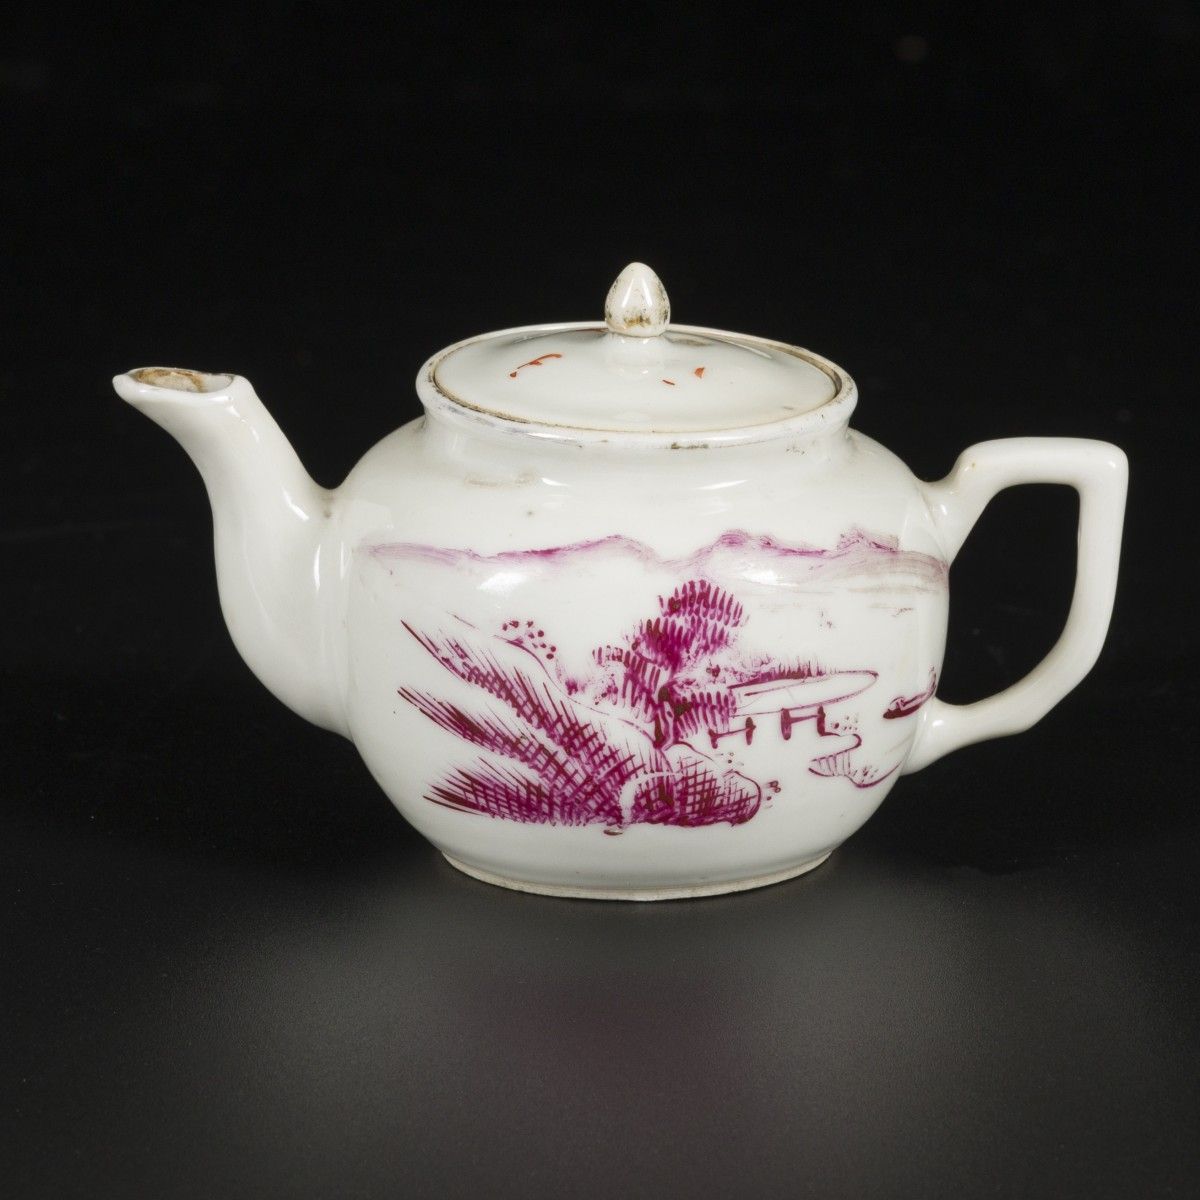 A porcelain teapot with Qianjiang Cai decoration, China, 19th century. Dim. 8 x &hellip;